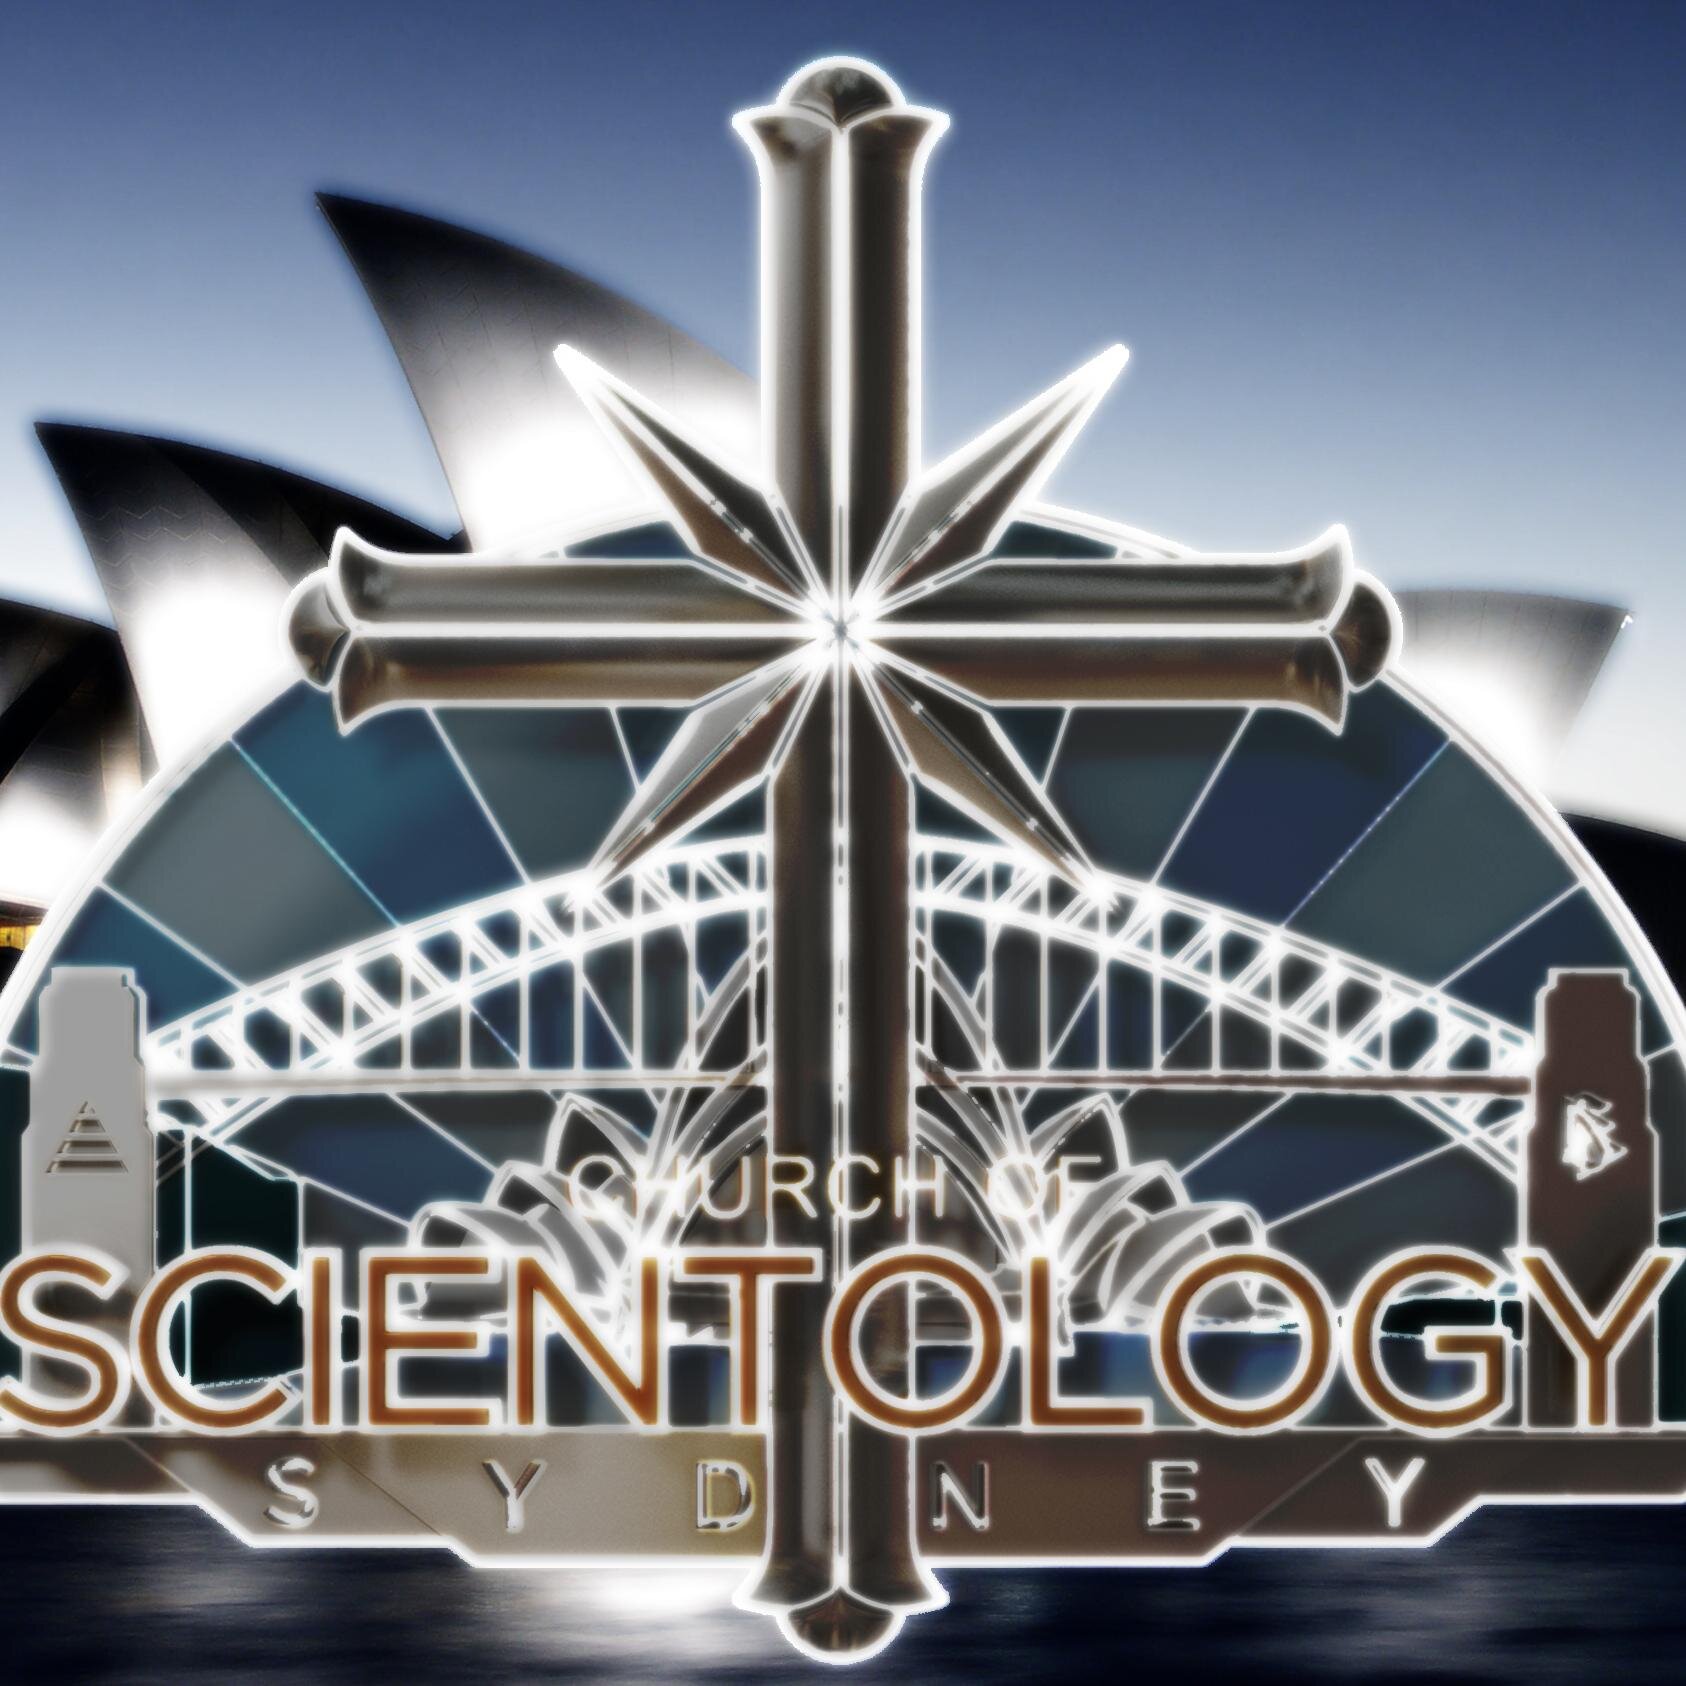 Welcome to the Church of Scientology Sydney, where new vistas of spiritual freedom await you! Find out for yourself what Scientology is all about!